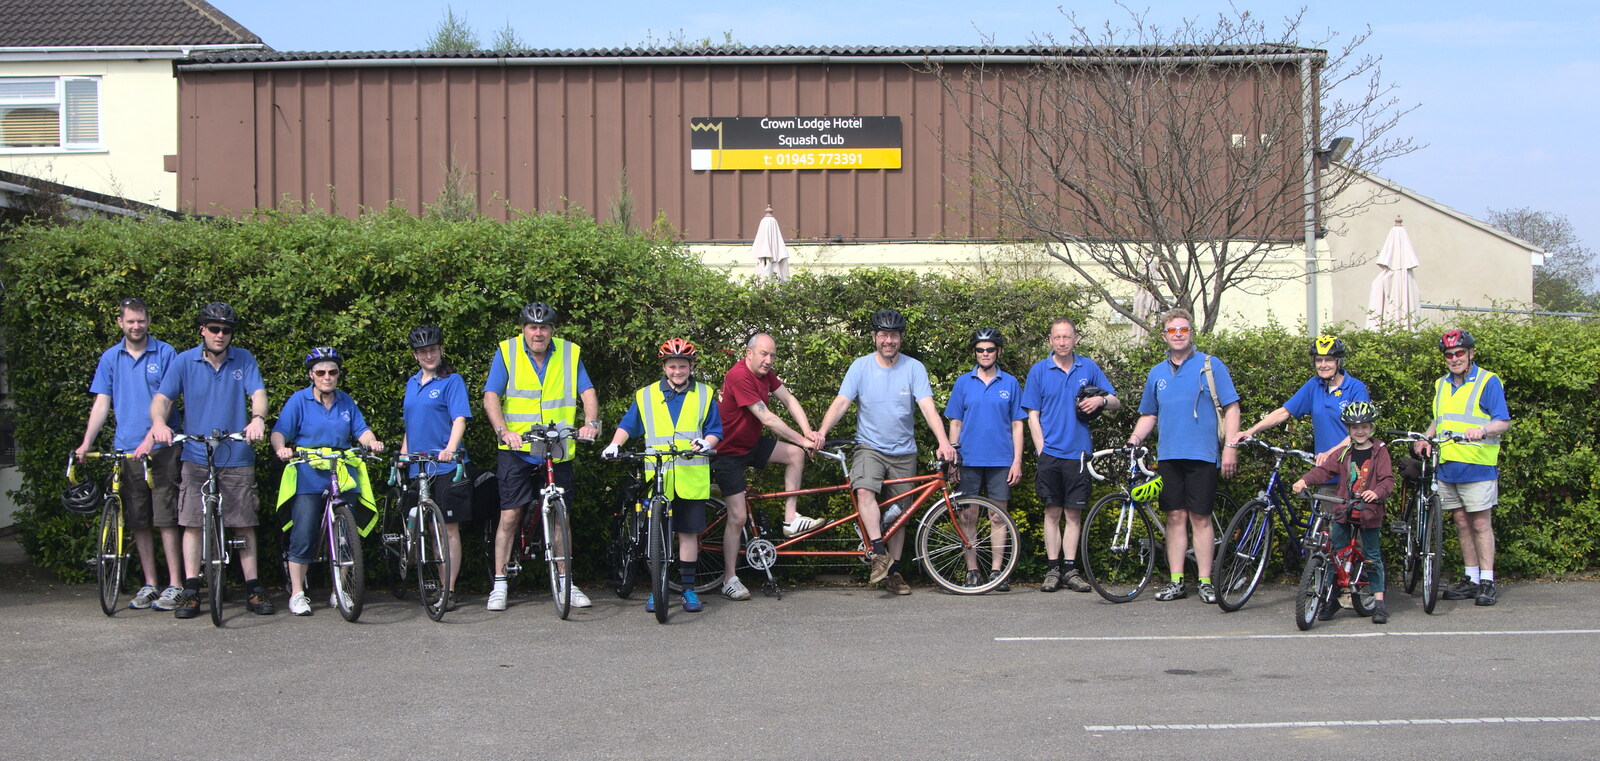 The traditional BSCC bike club photo from The BSCC Cycling Weekender, Outwell, West Norfolk - 7th May 2016